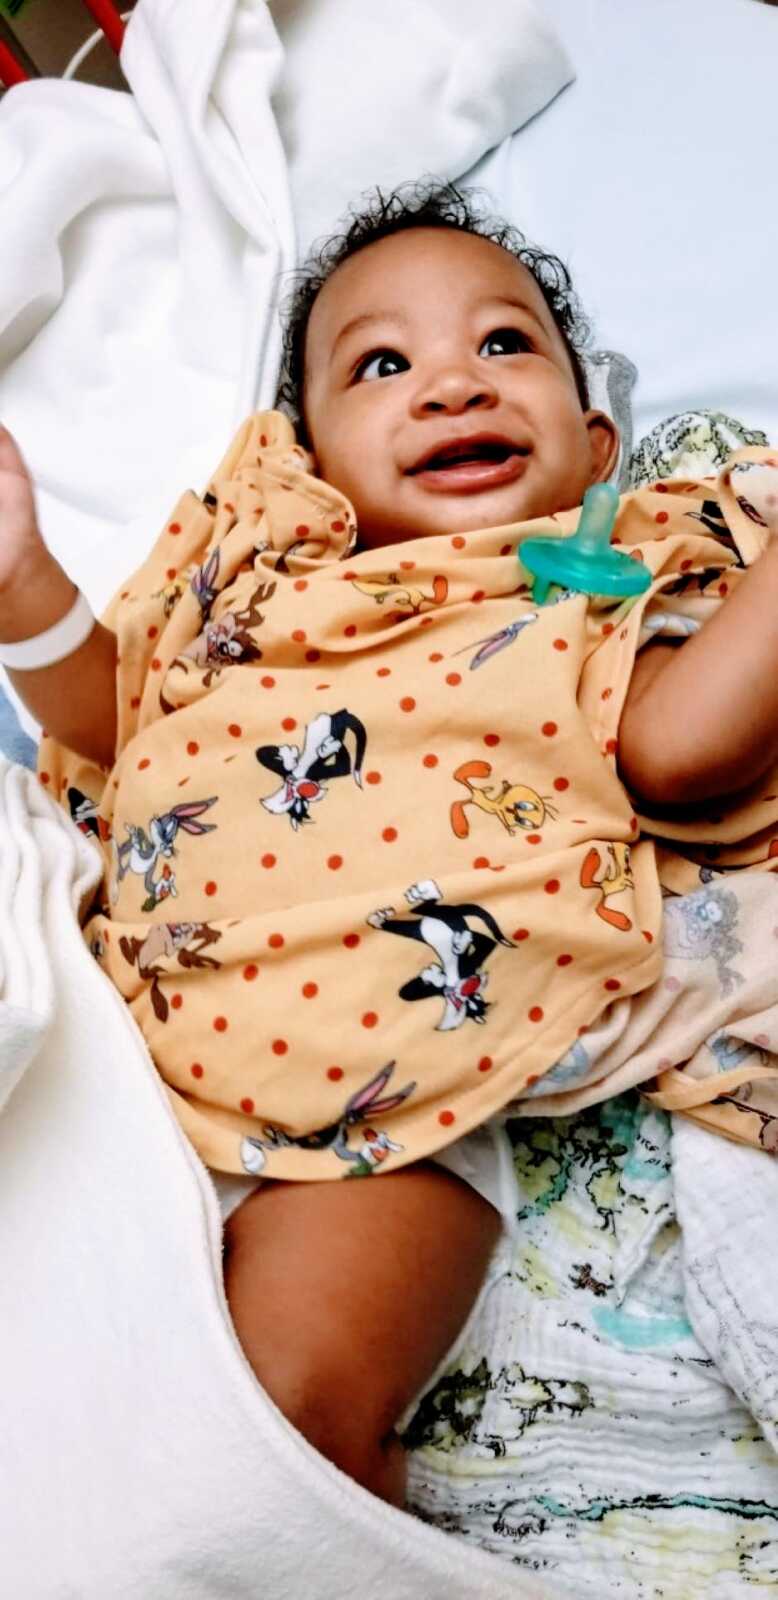 Little boy smiles while wearing Looney Tunes hospital gown